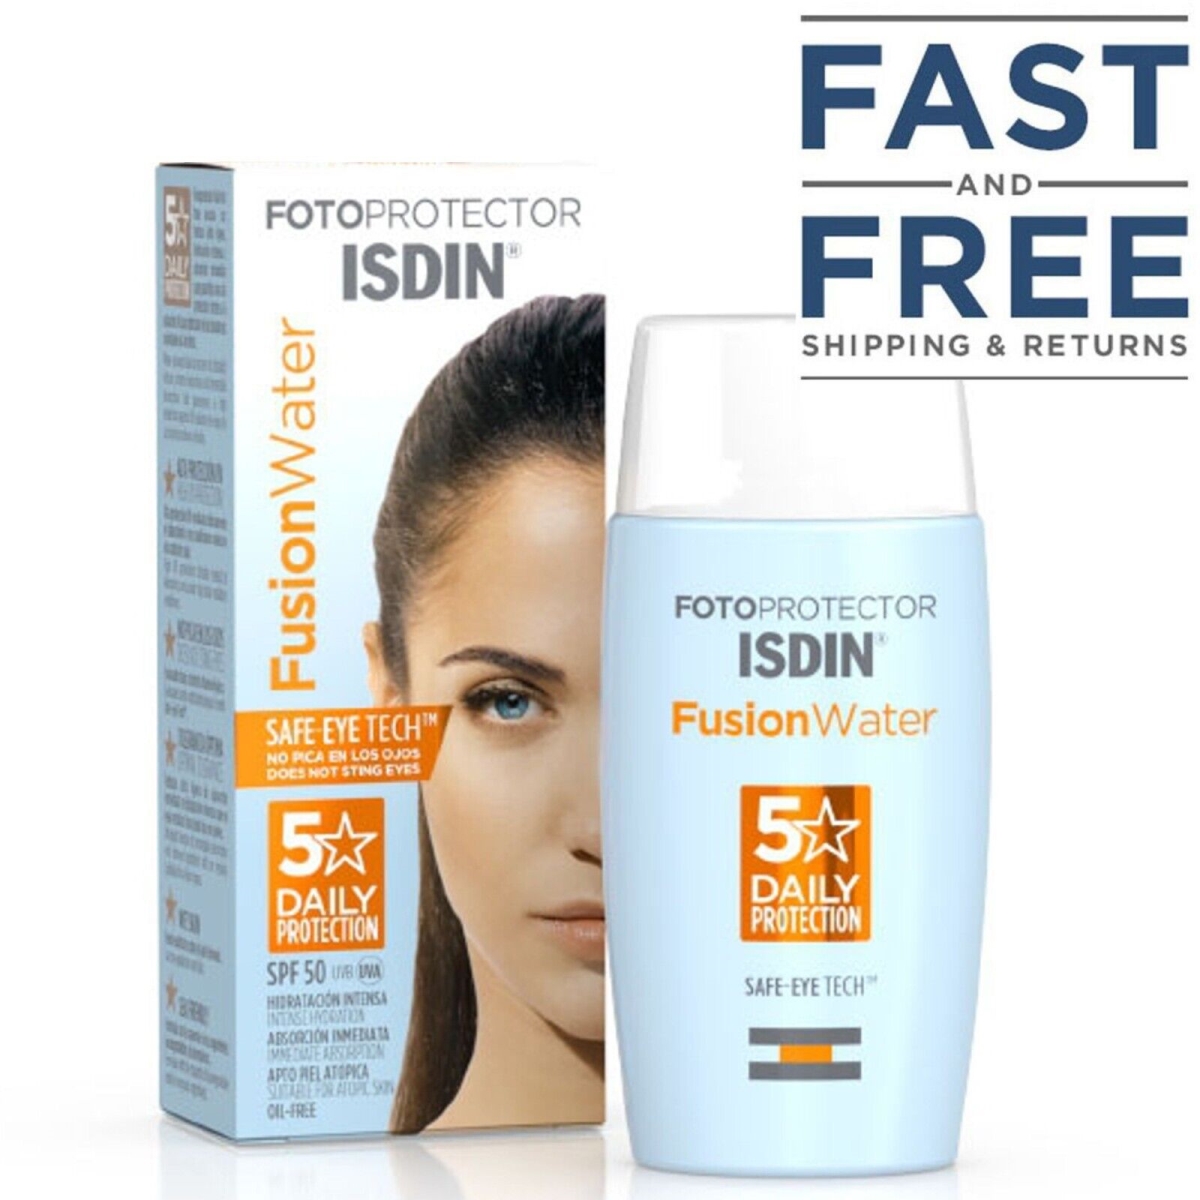 2Seeds 382836631555 50 ml SPF 50 Plus Isdin Fotoprotector Fusion Water Chemical Sunscreen